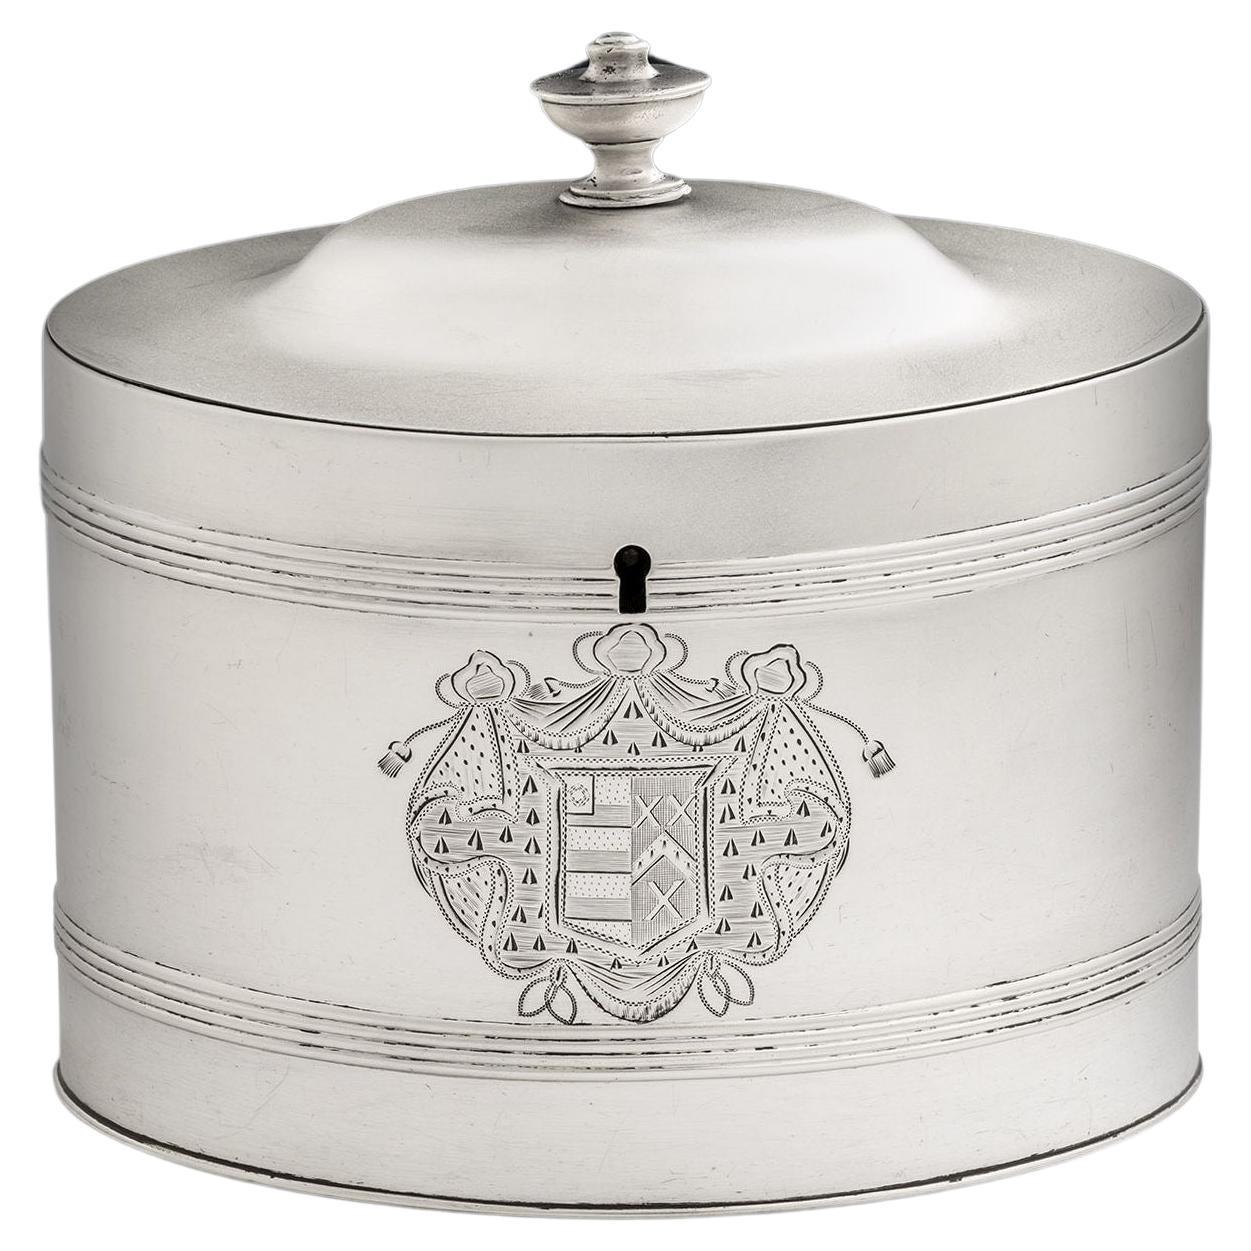 George III Tea Caddy Made in London by Robert Hennell, 1795